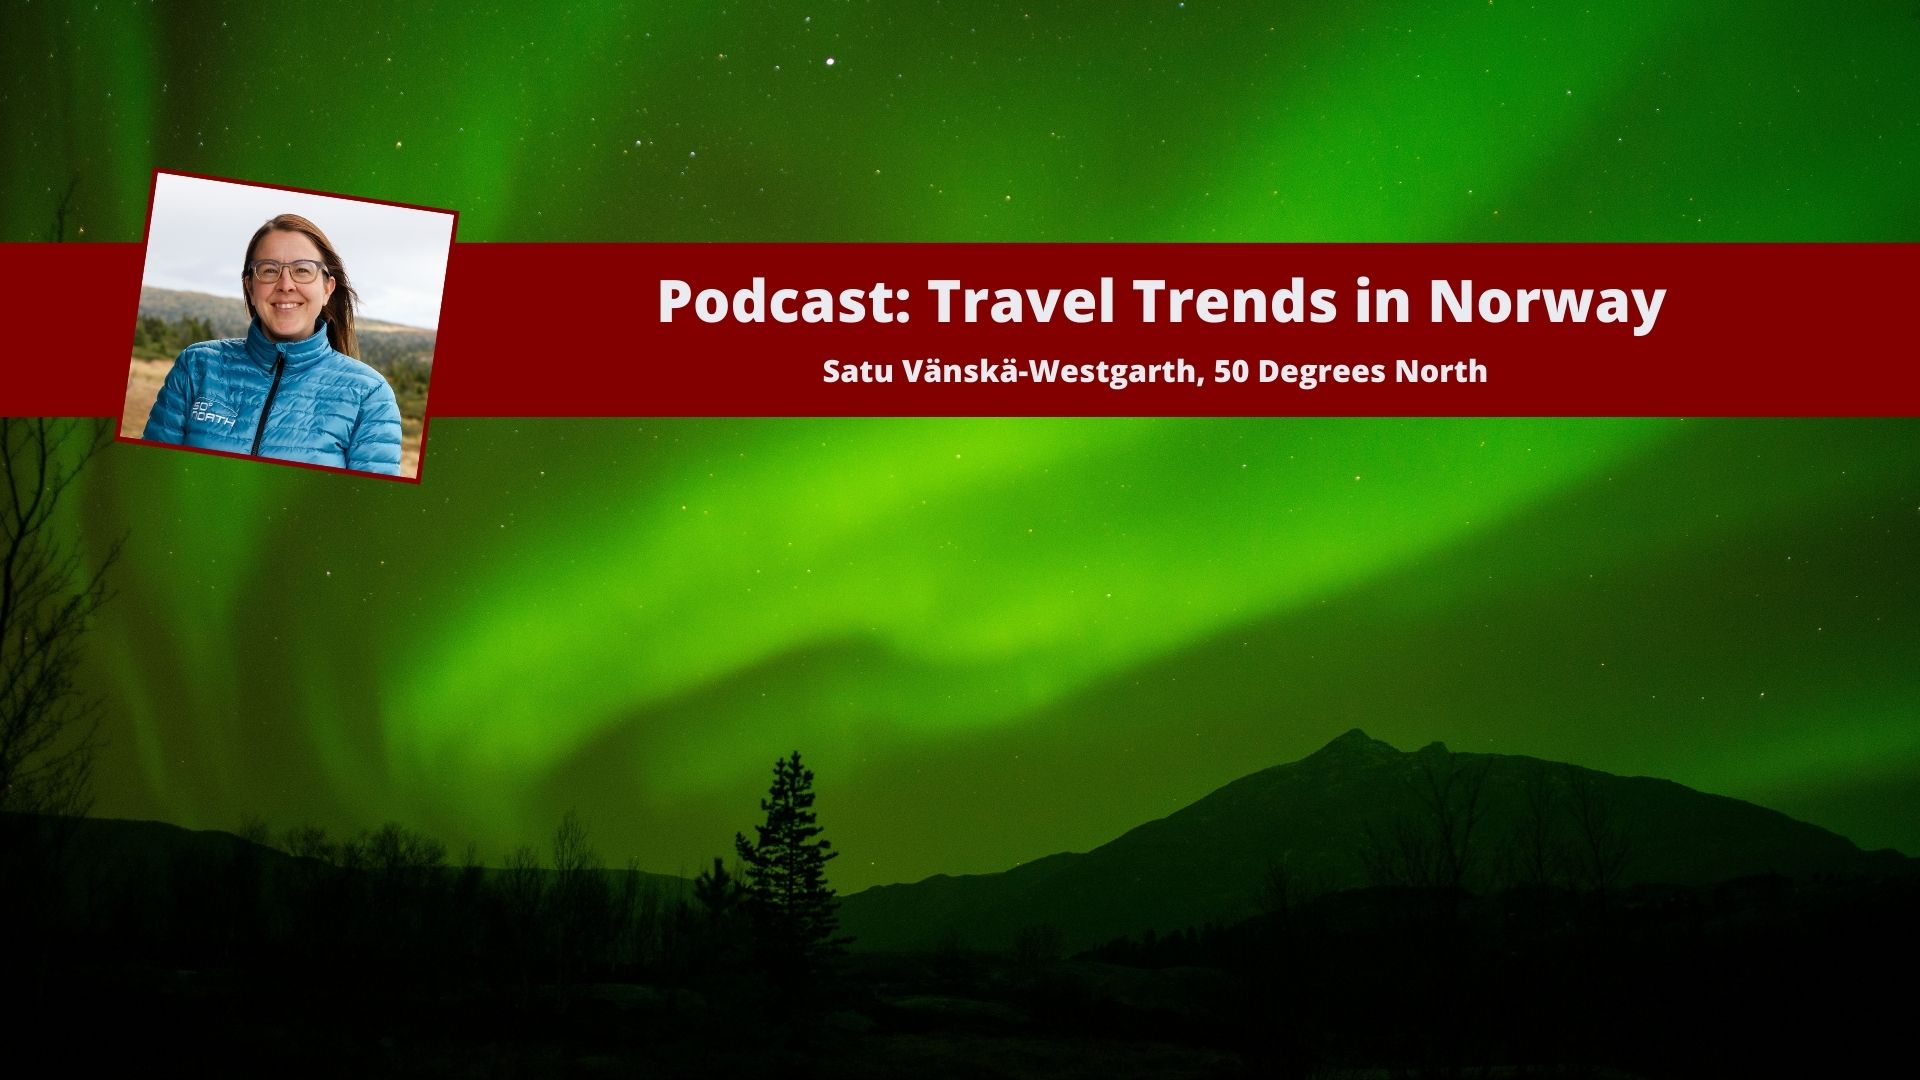 Podcast travel trends in Norway